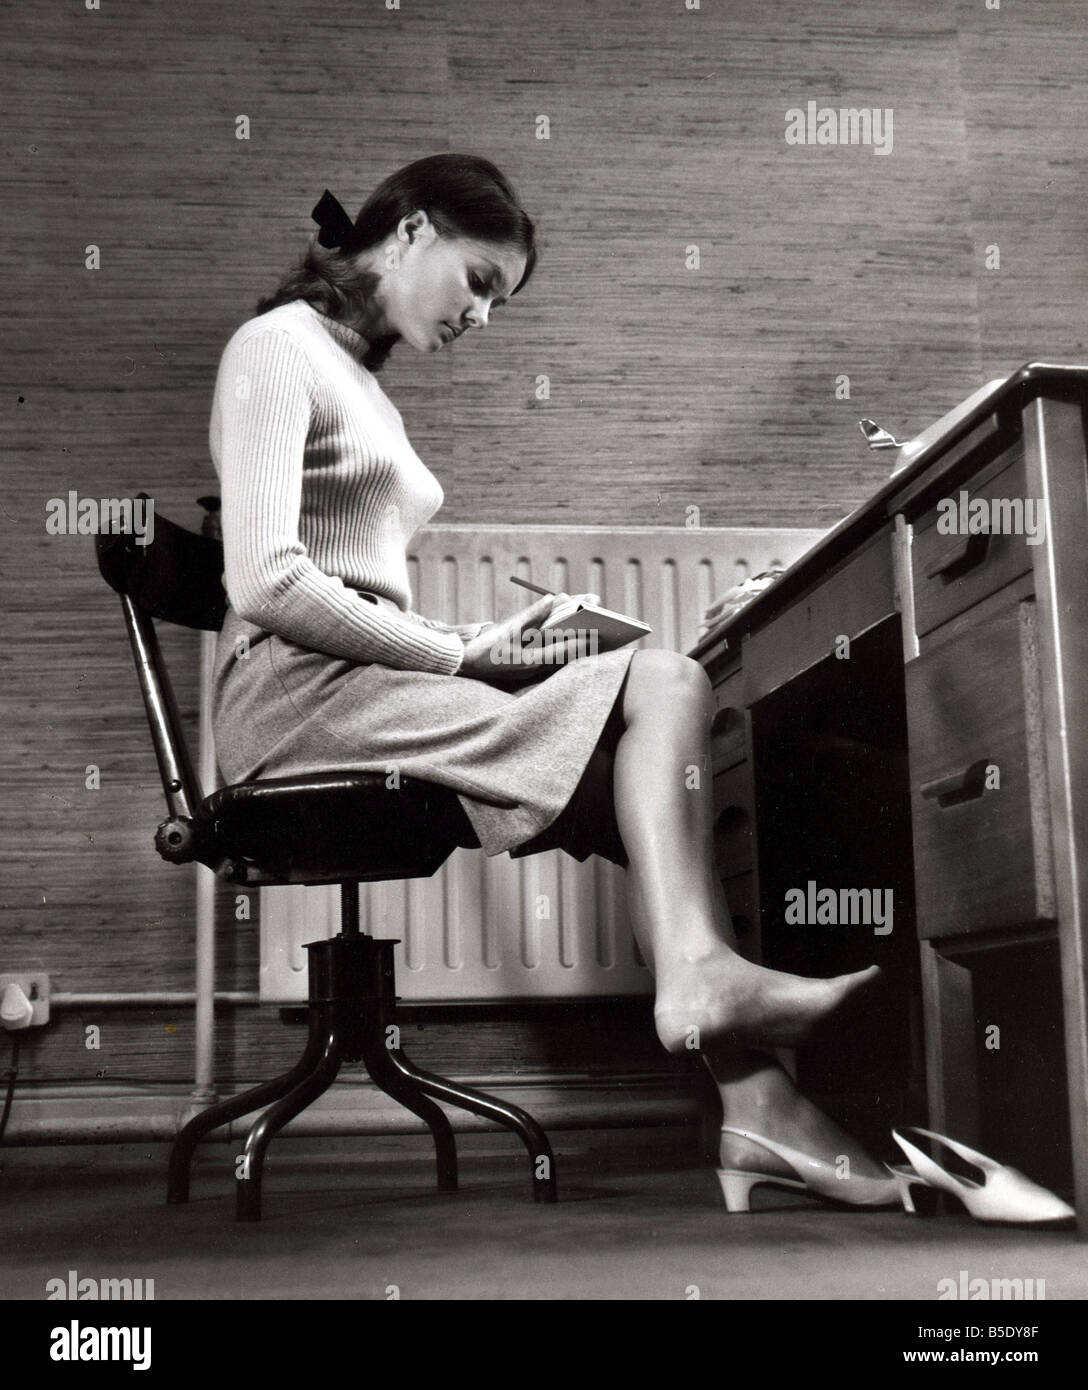 Female office worker sitting taking notes Writing barefoot taking shoe off 1960s Stock Photo